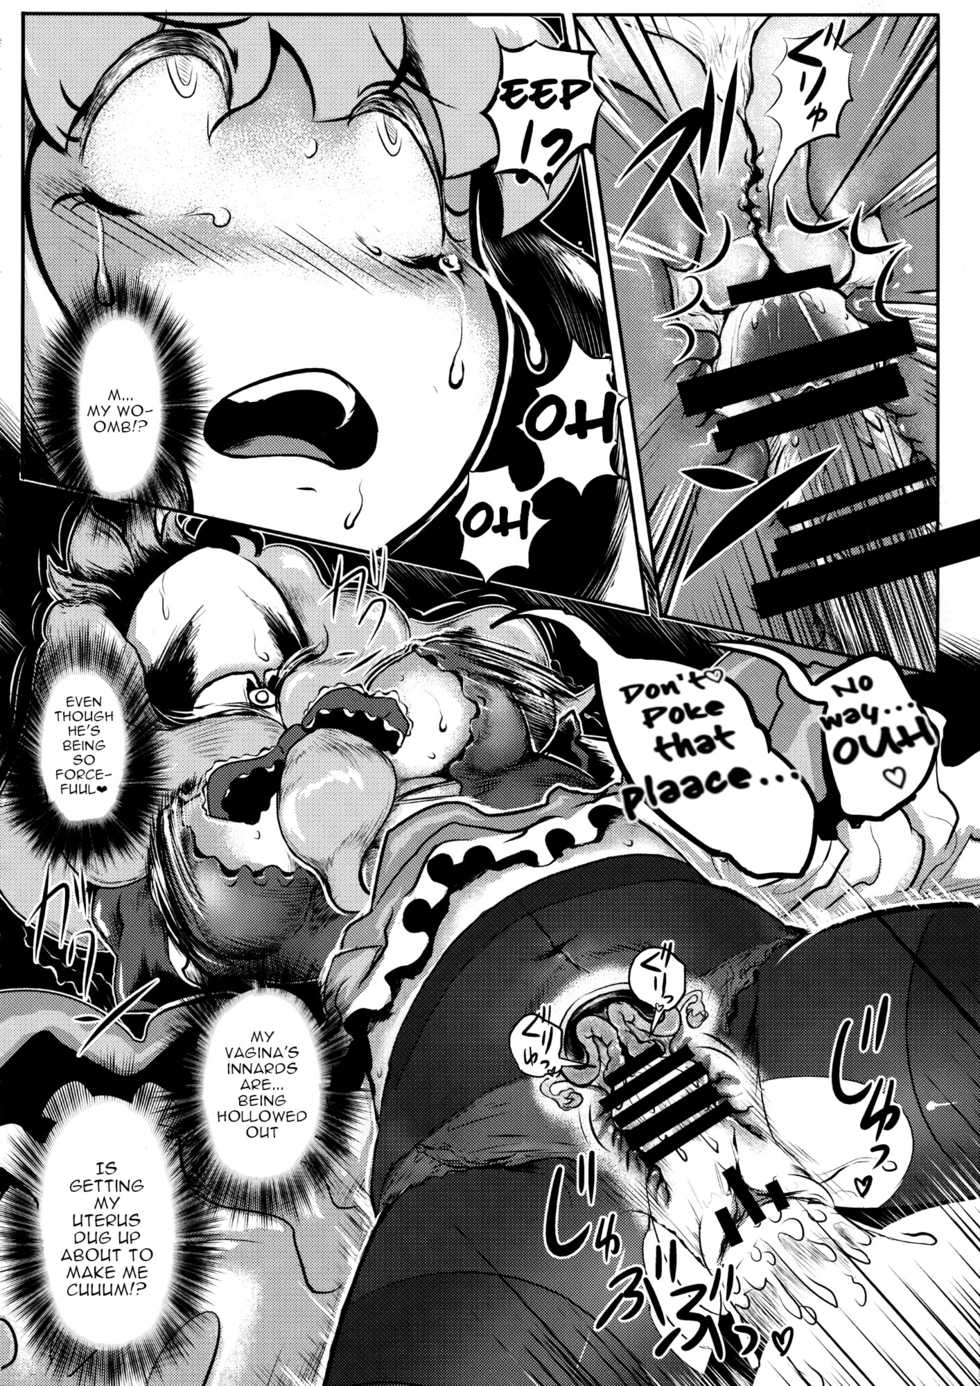 (C86) [We are COMING! (Various)] Touhou Kouousei (Touhou Project) [English] [robypoo] - Page 31